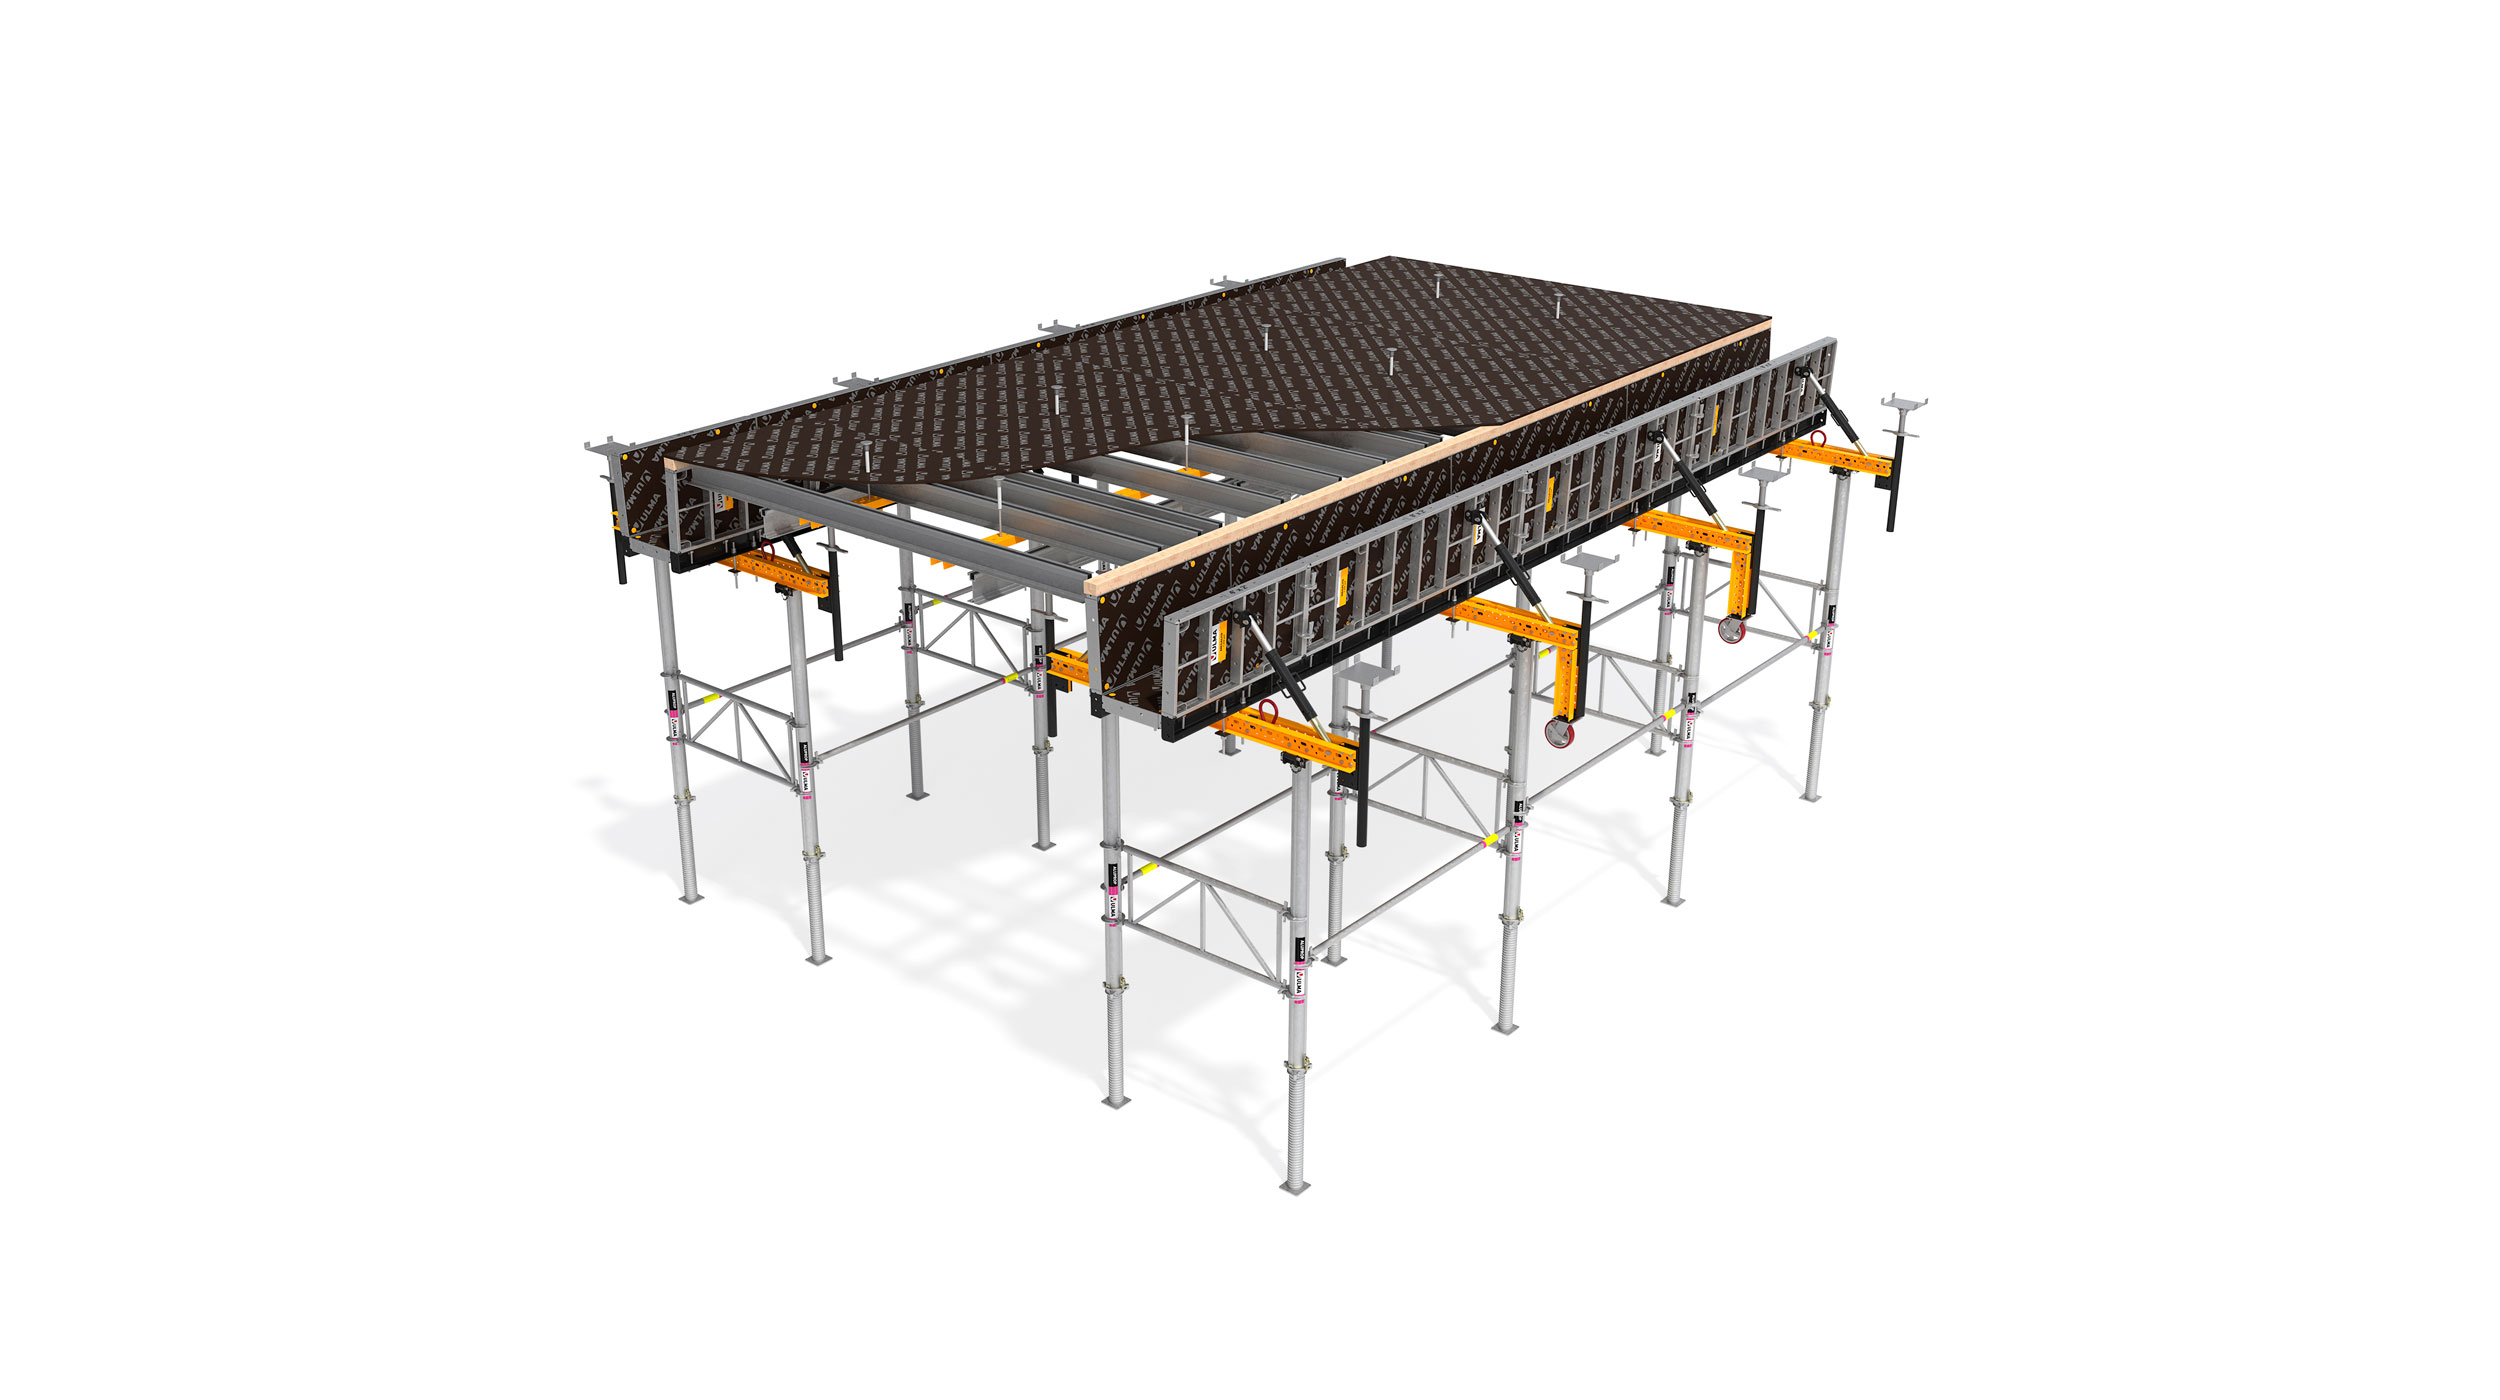 A new efficient & versatile formwork shoring solution for forming cast-in-place garage beams and slabs for parking structures using US-style construction methods in imperial measurements.